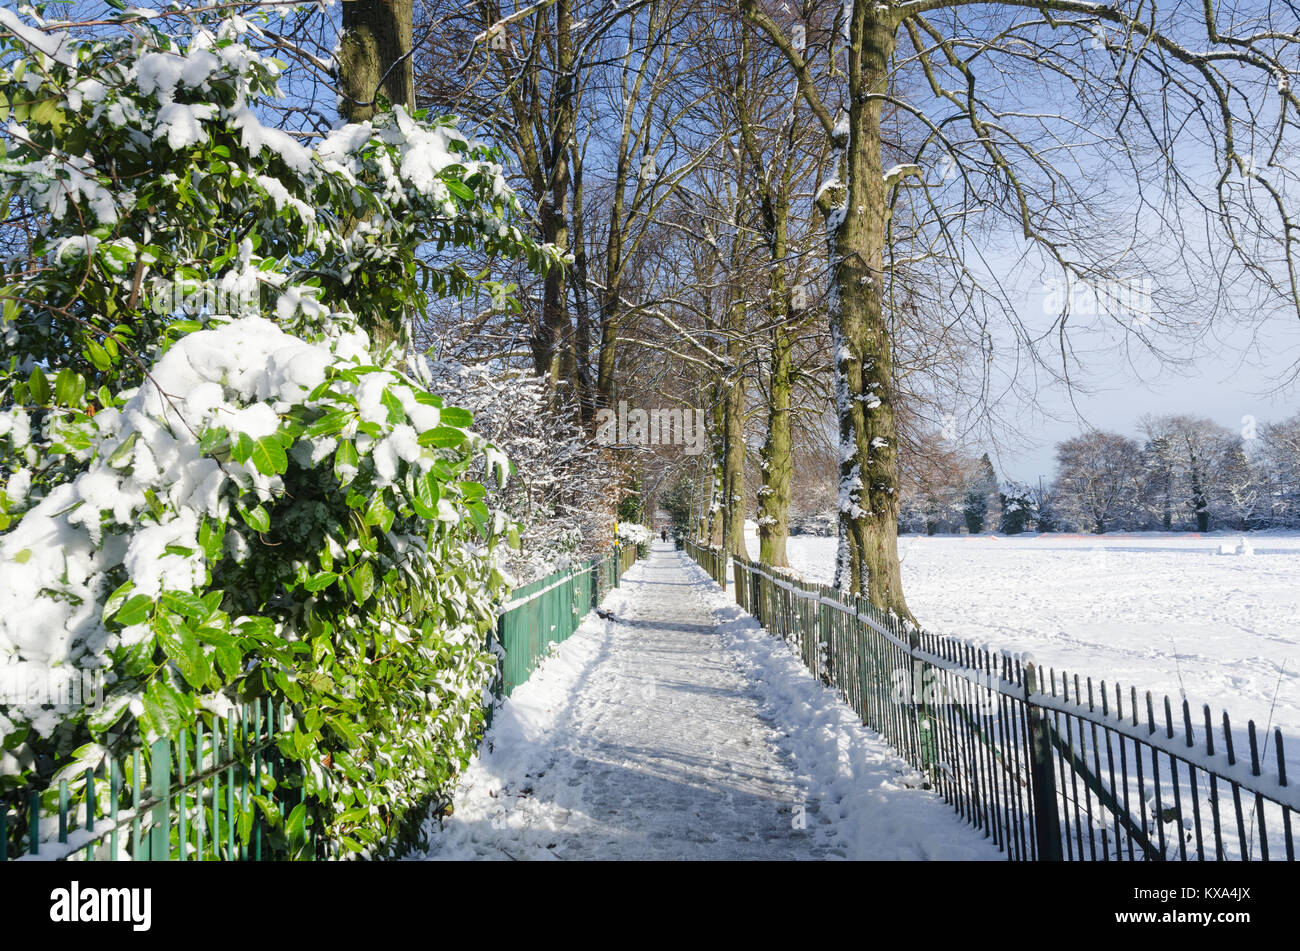 Tree-lined footpath running through Harborne Cricket Club after a heavy overnight snowfall. Stock Photo